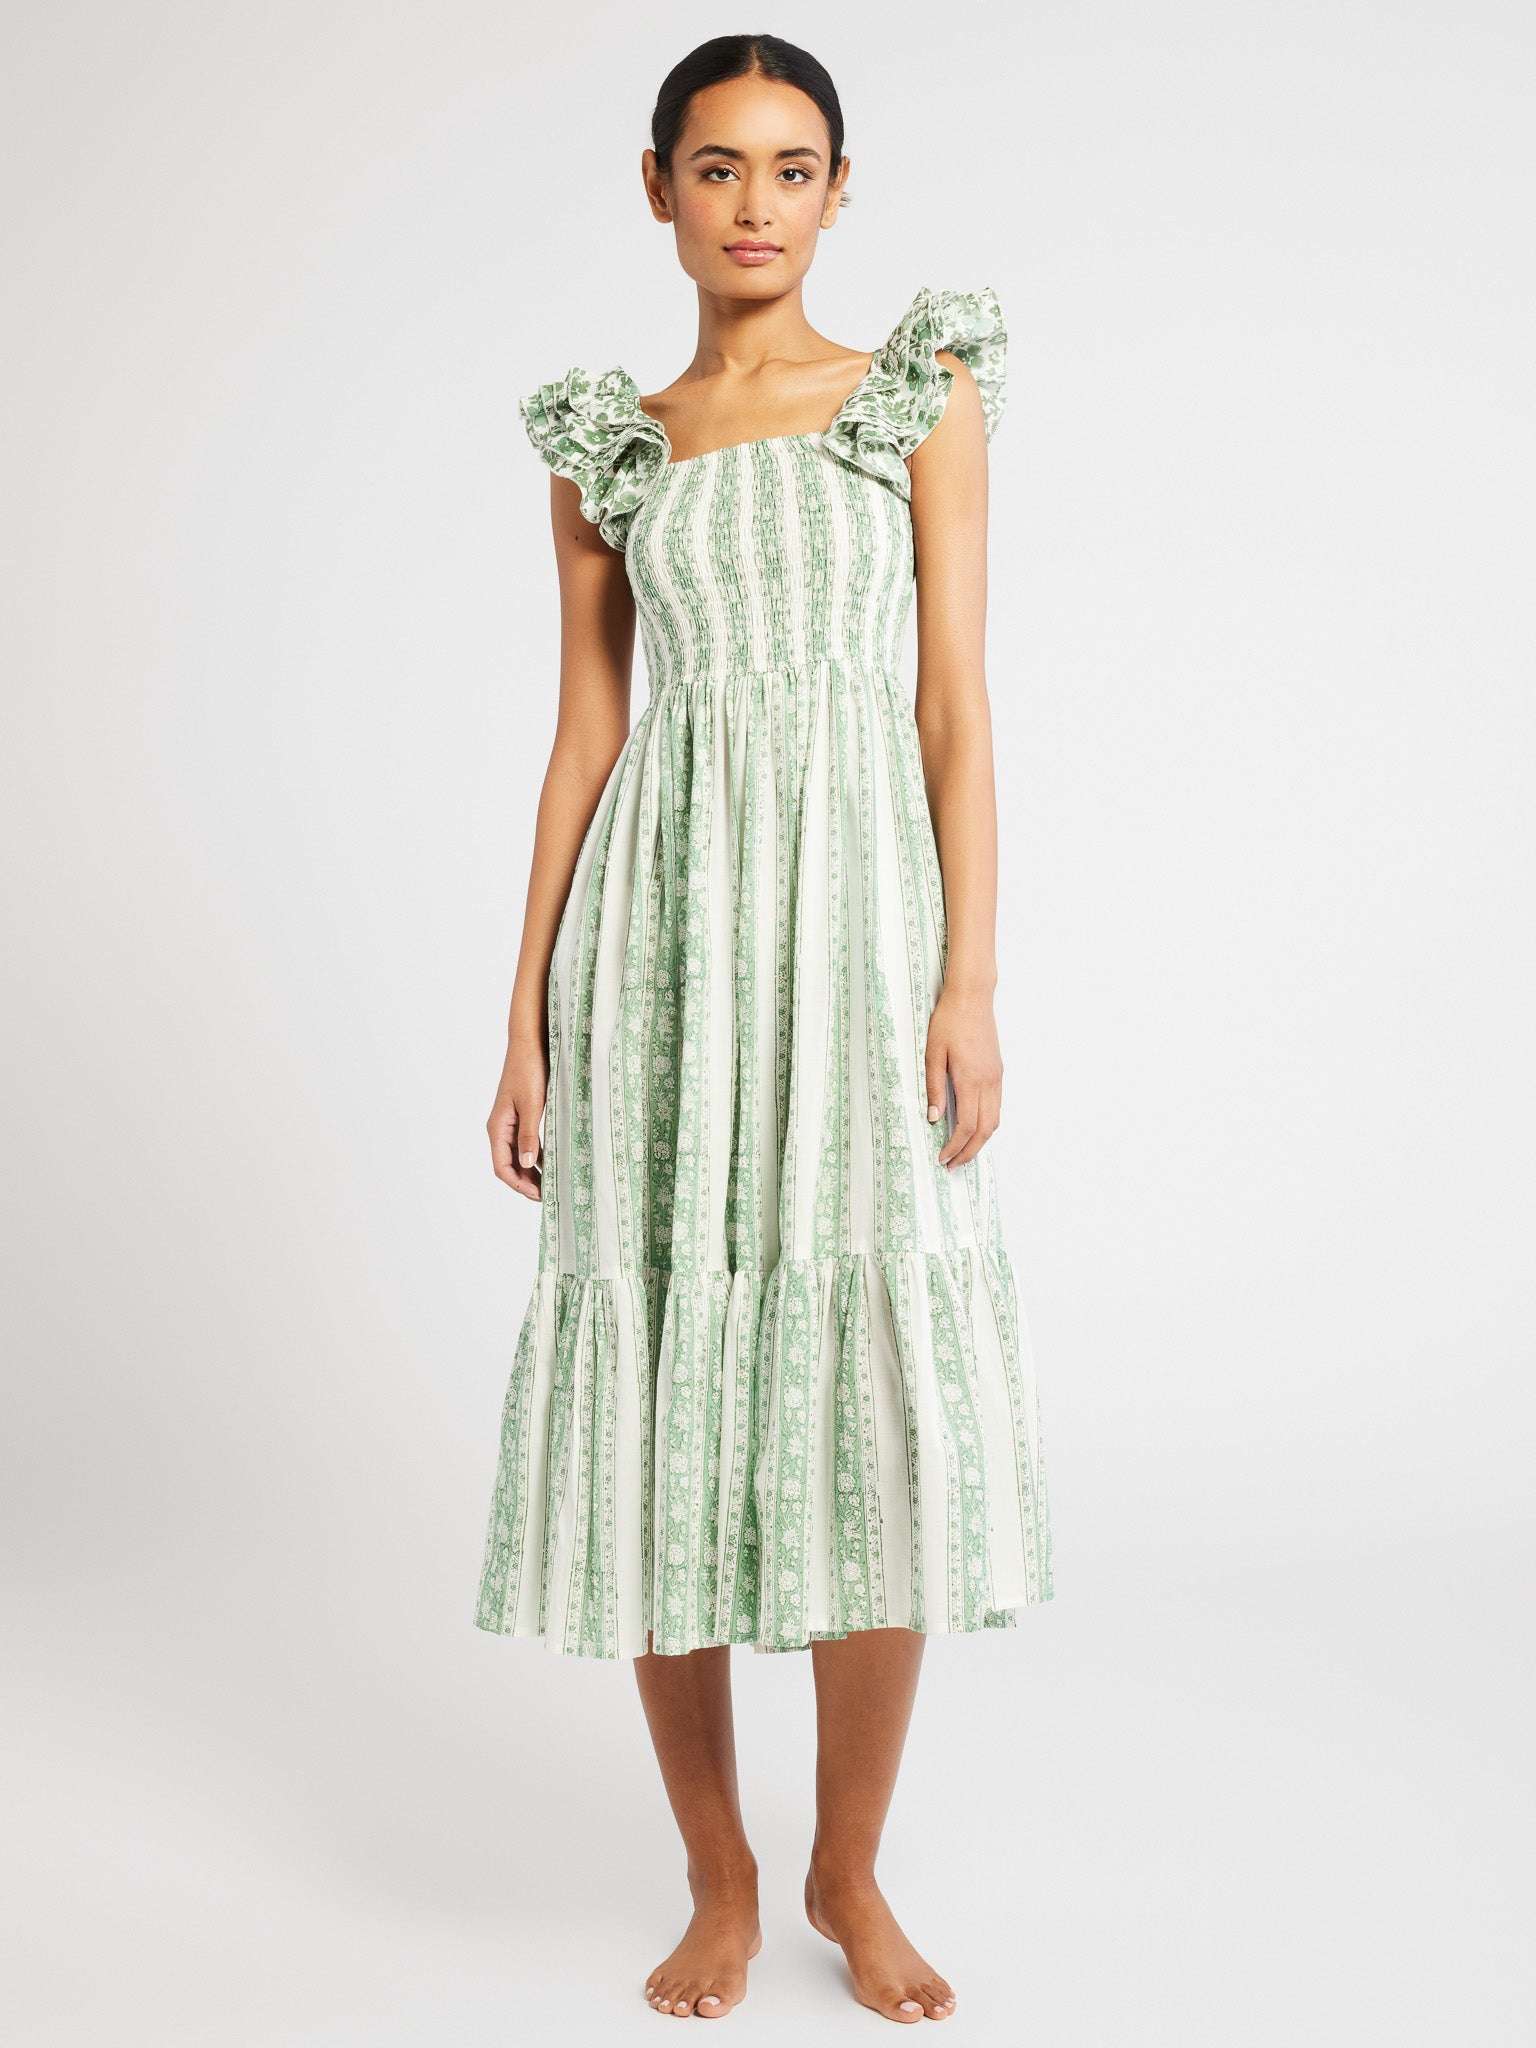 MILLE Clothing Olympia Dress in Green Jaipur Stripe